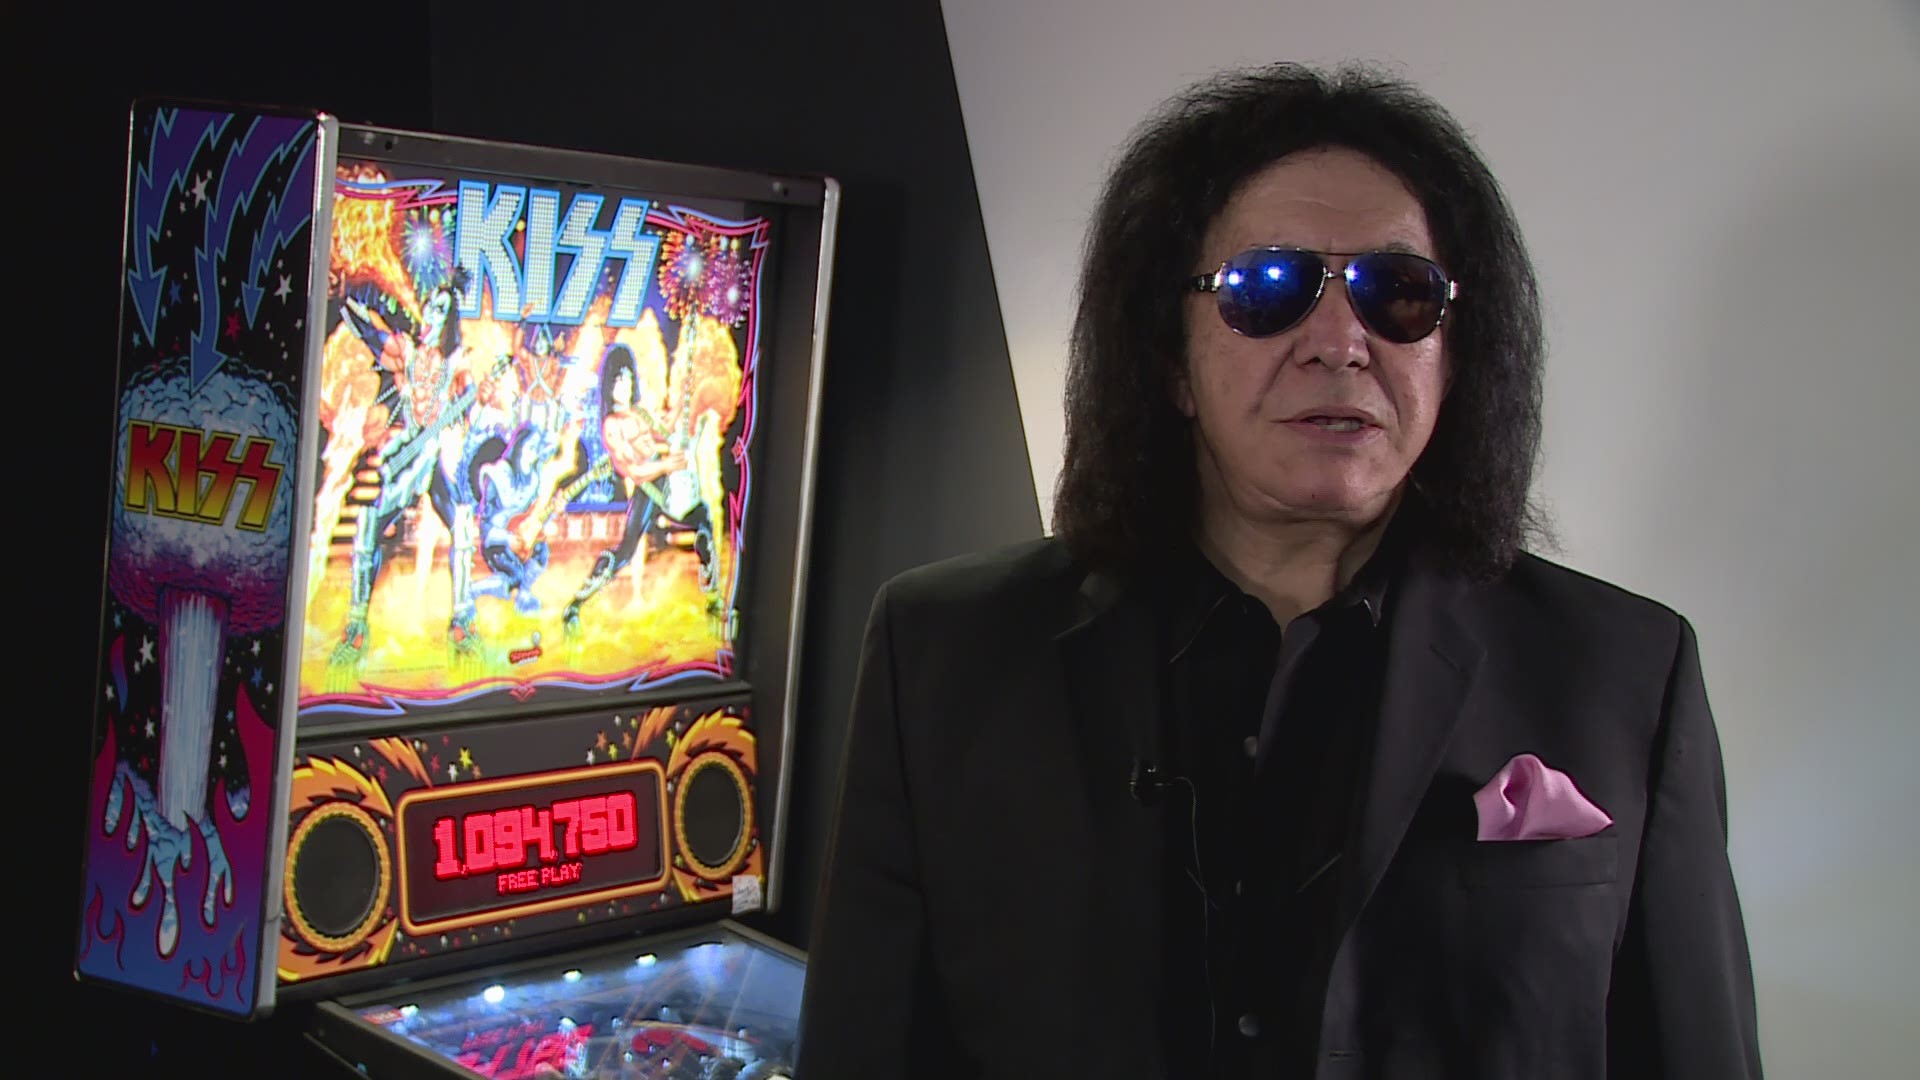 FULL INTERVIEW: Music legend Gene Simmons speaks with WKYC